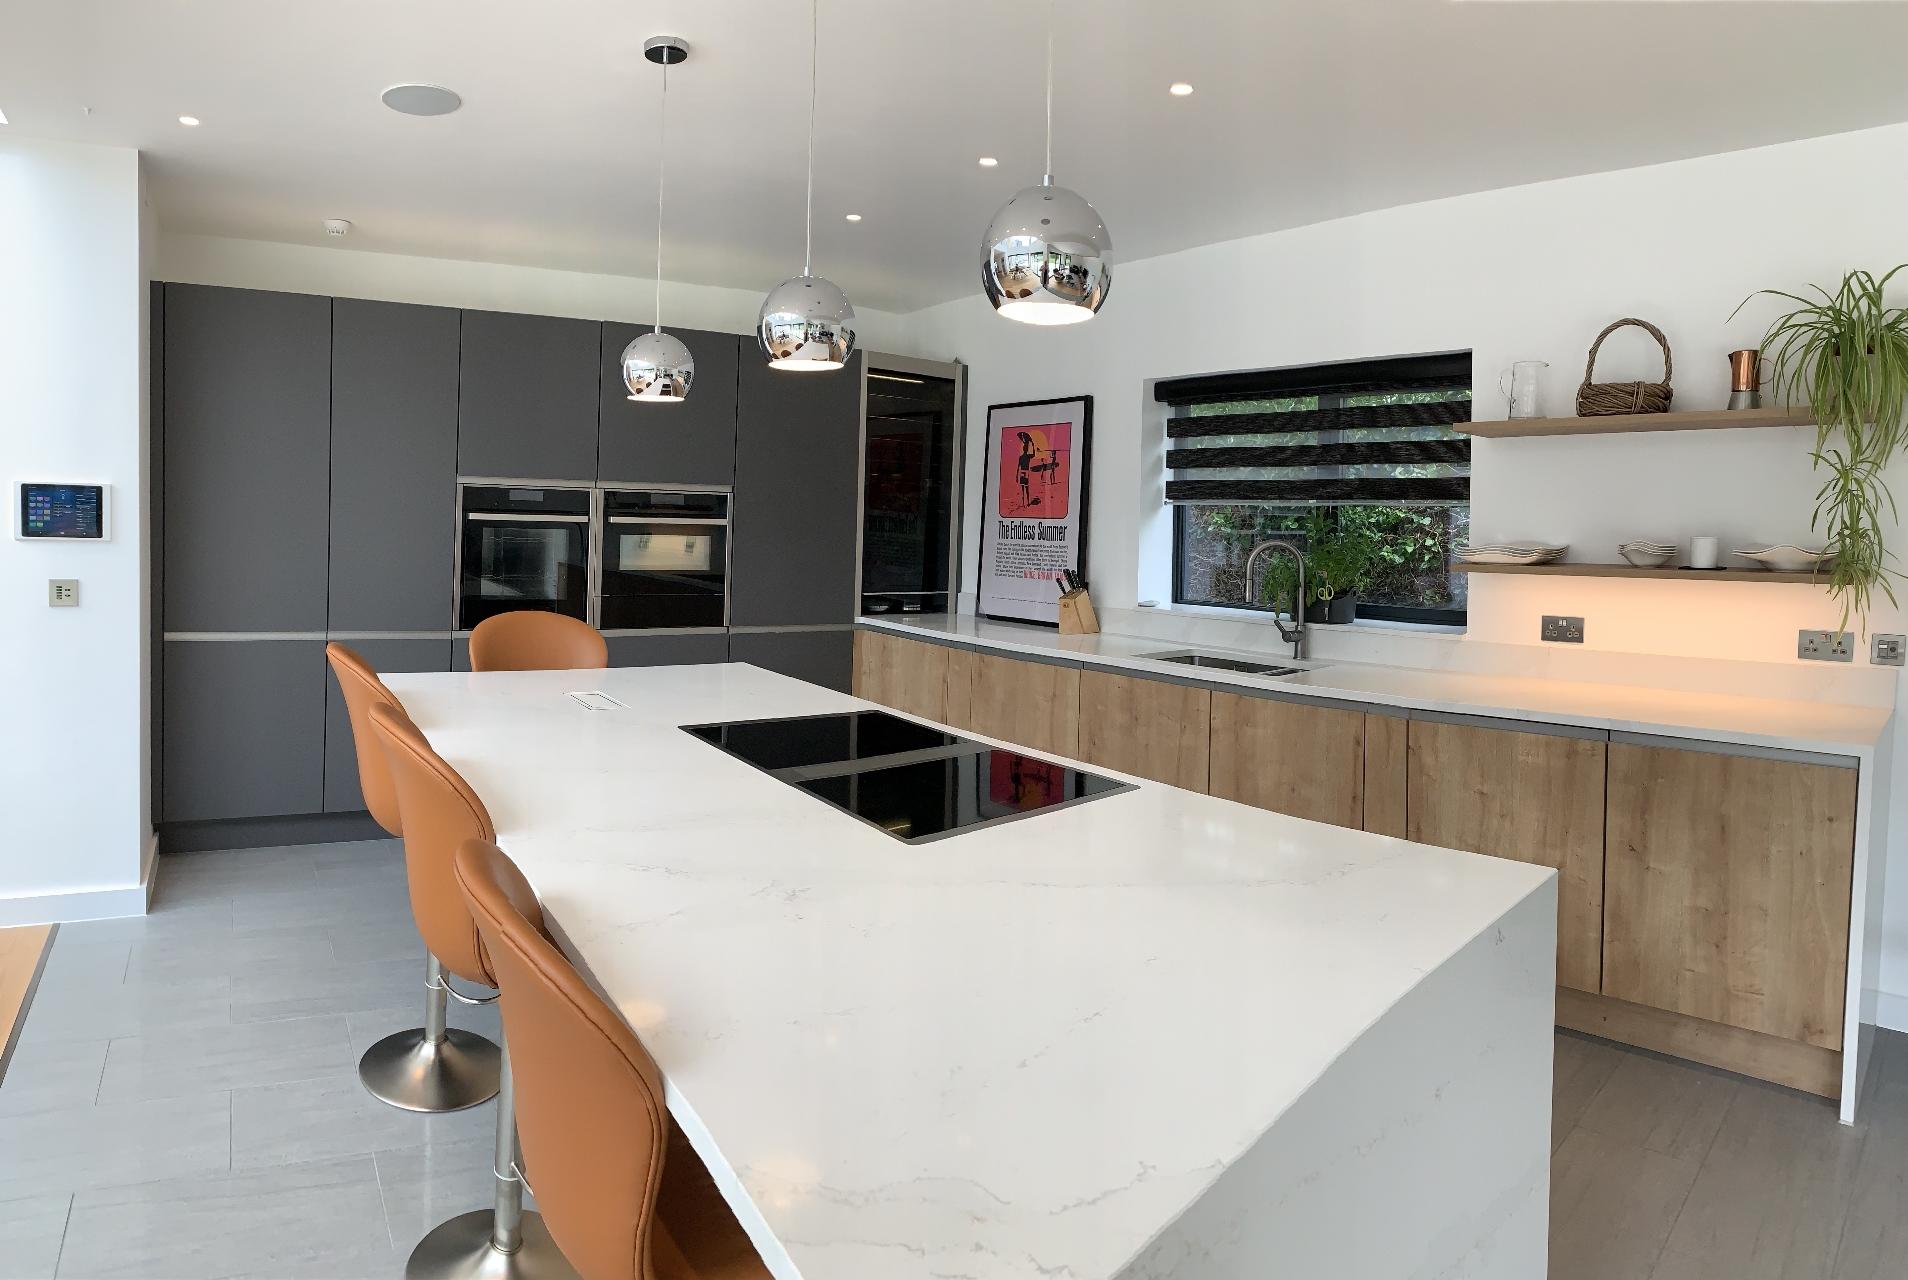 </p> <p>Find your ideal home design pro on designfor-me.com - get matched and see who's interested in your home project. Click image to see more inspiration from our design pros</p> <p>Design by Ahmed, architect from Hackney, London</p> <p>#architecture #homedesign #modernhomes #homeinspiration #kitchens #kitchendesign #kitcheninspiration #kitchenideas #kitchengoals </p> <p>